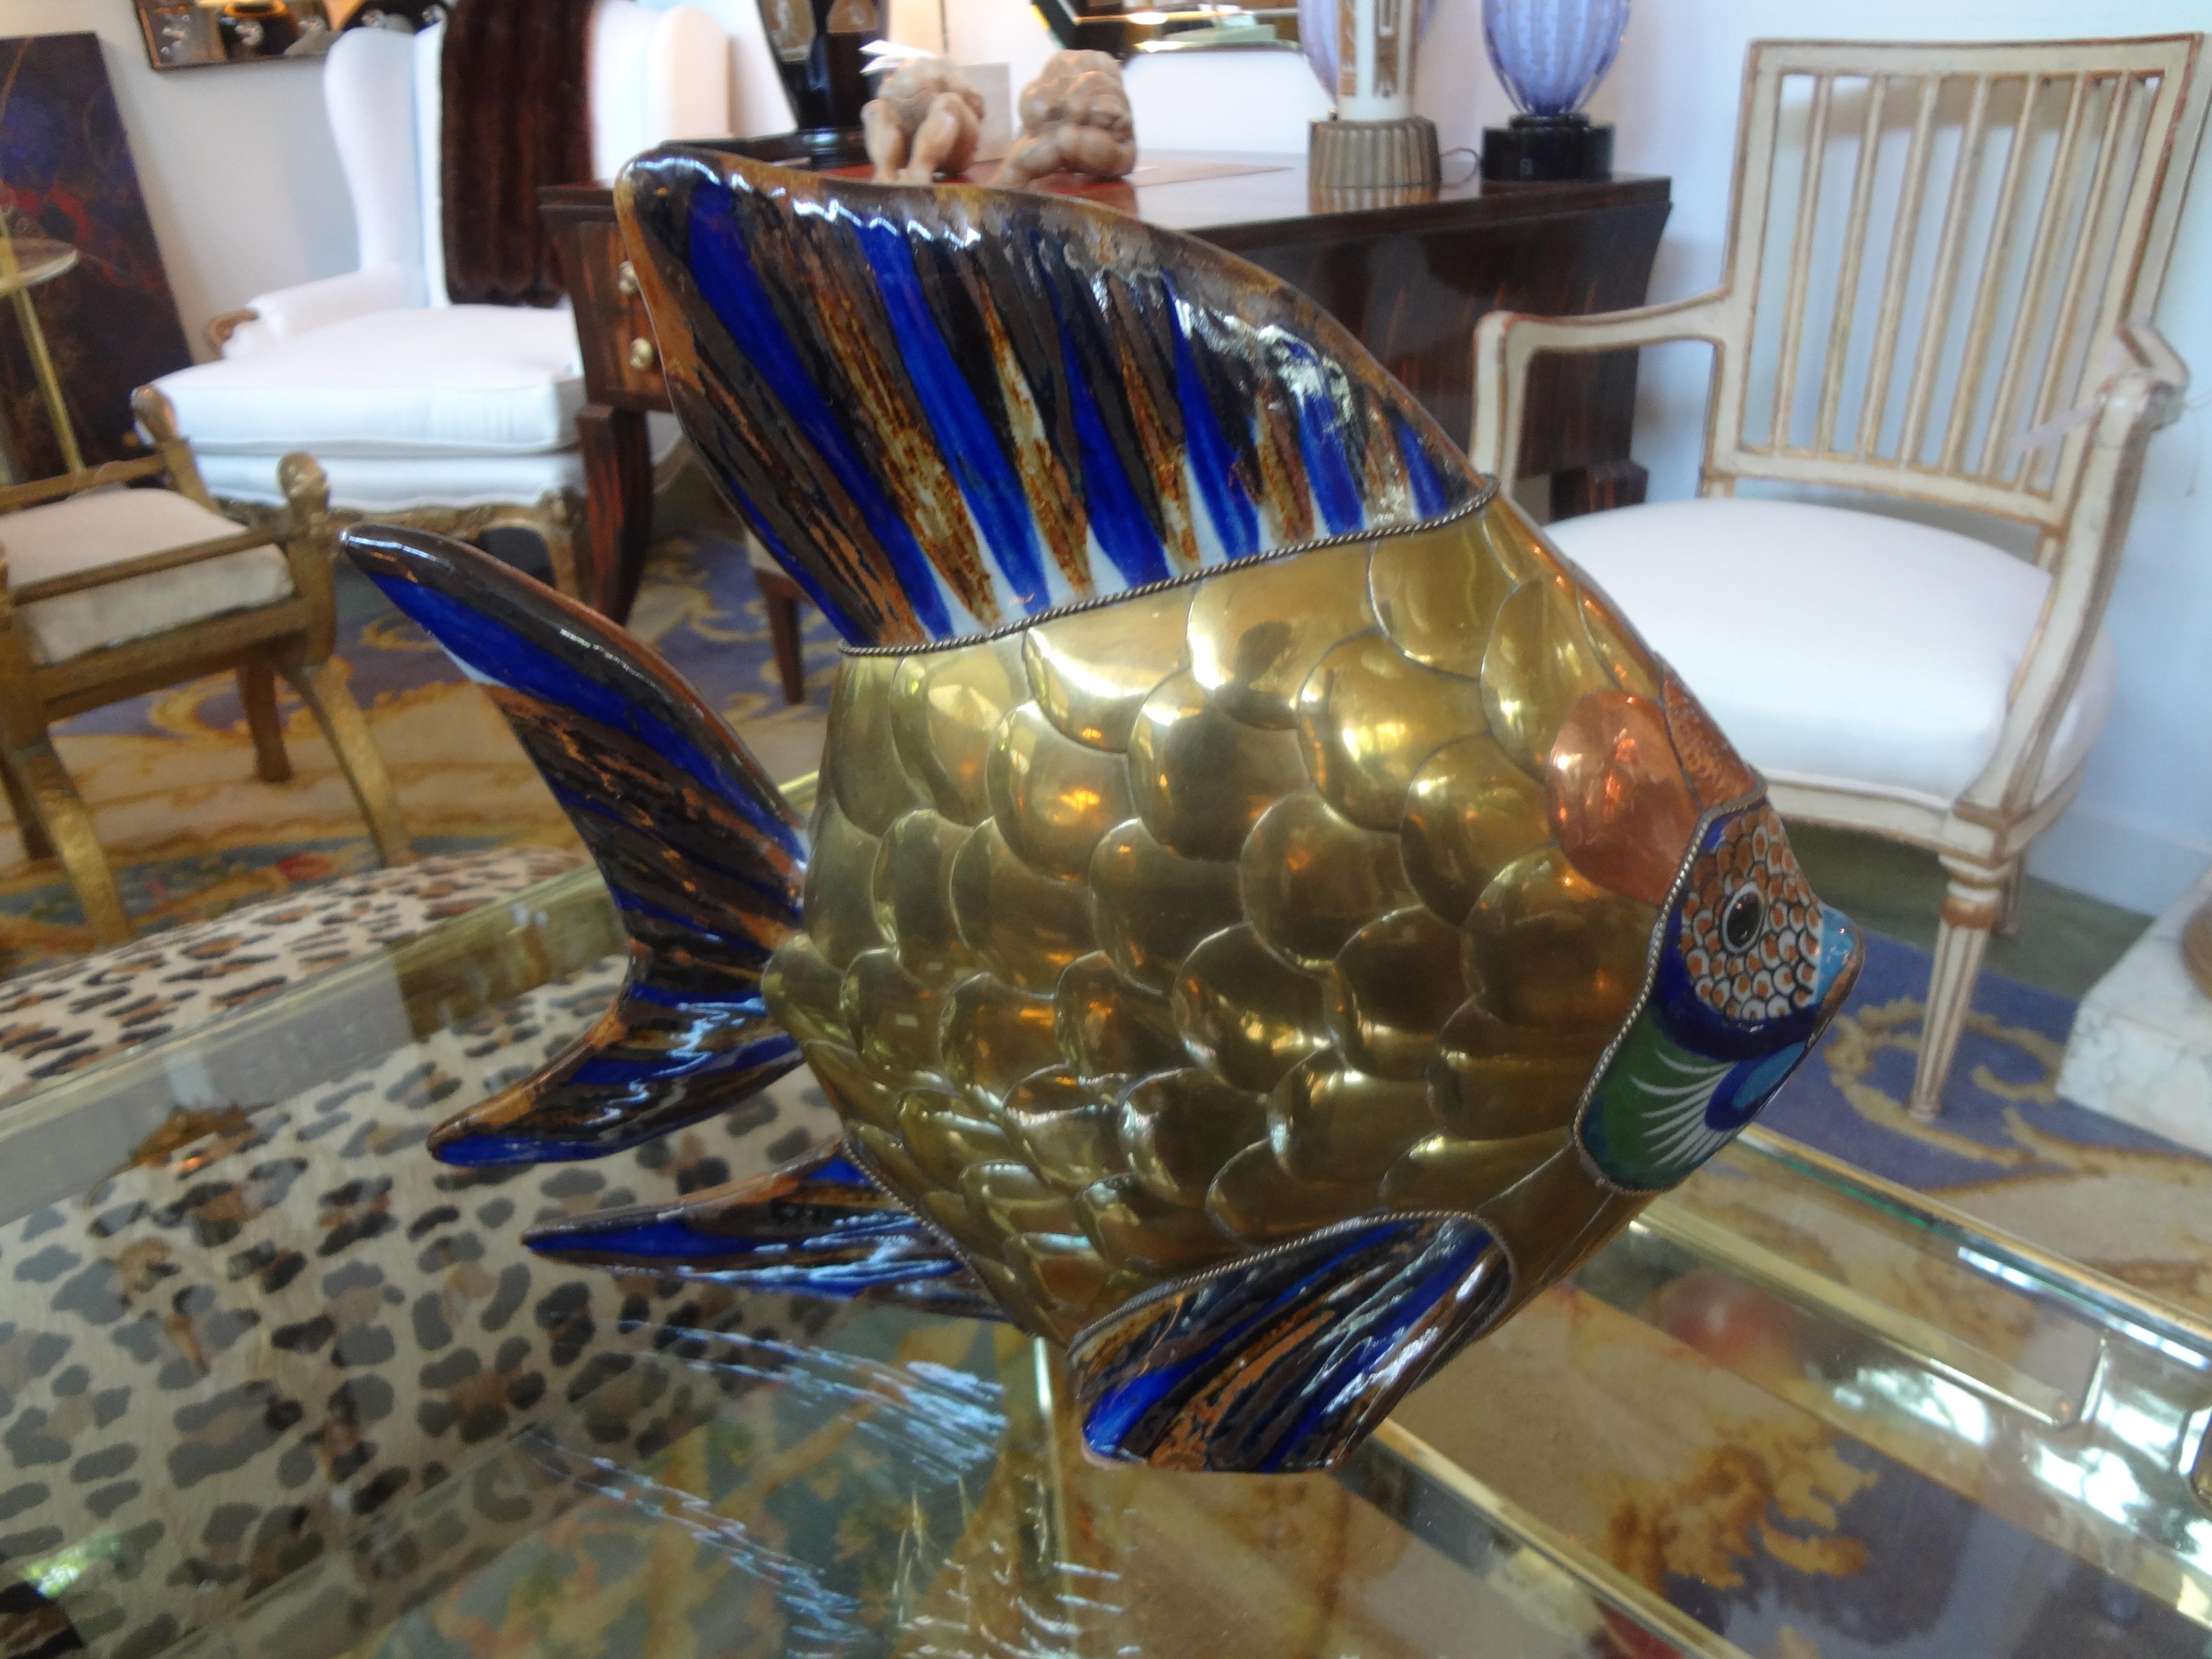 Stunning vintage Midcentury brass, copper and glazed pottery fish sculpture. This Hollywood Regency mixed metal sculpture dates to the mid-20th century.